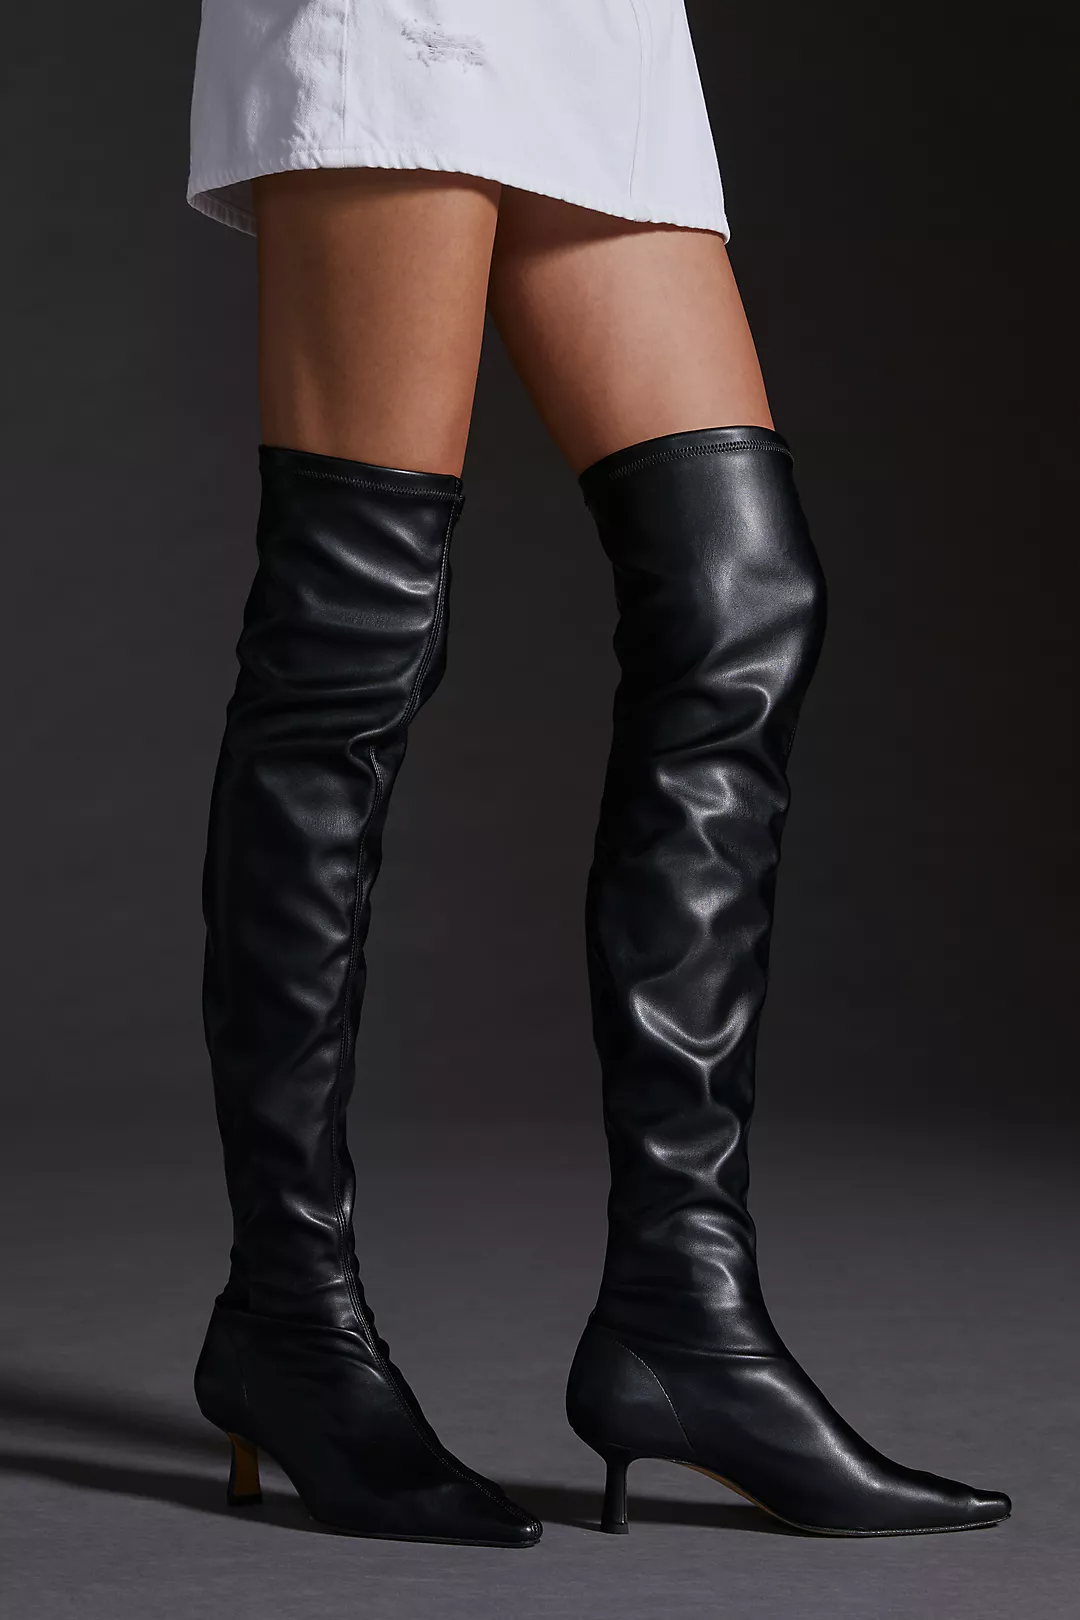 13 Best Black Boots for Women 2021 - Stylish Black Boots to Wear This Season